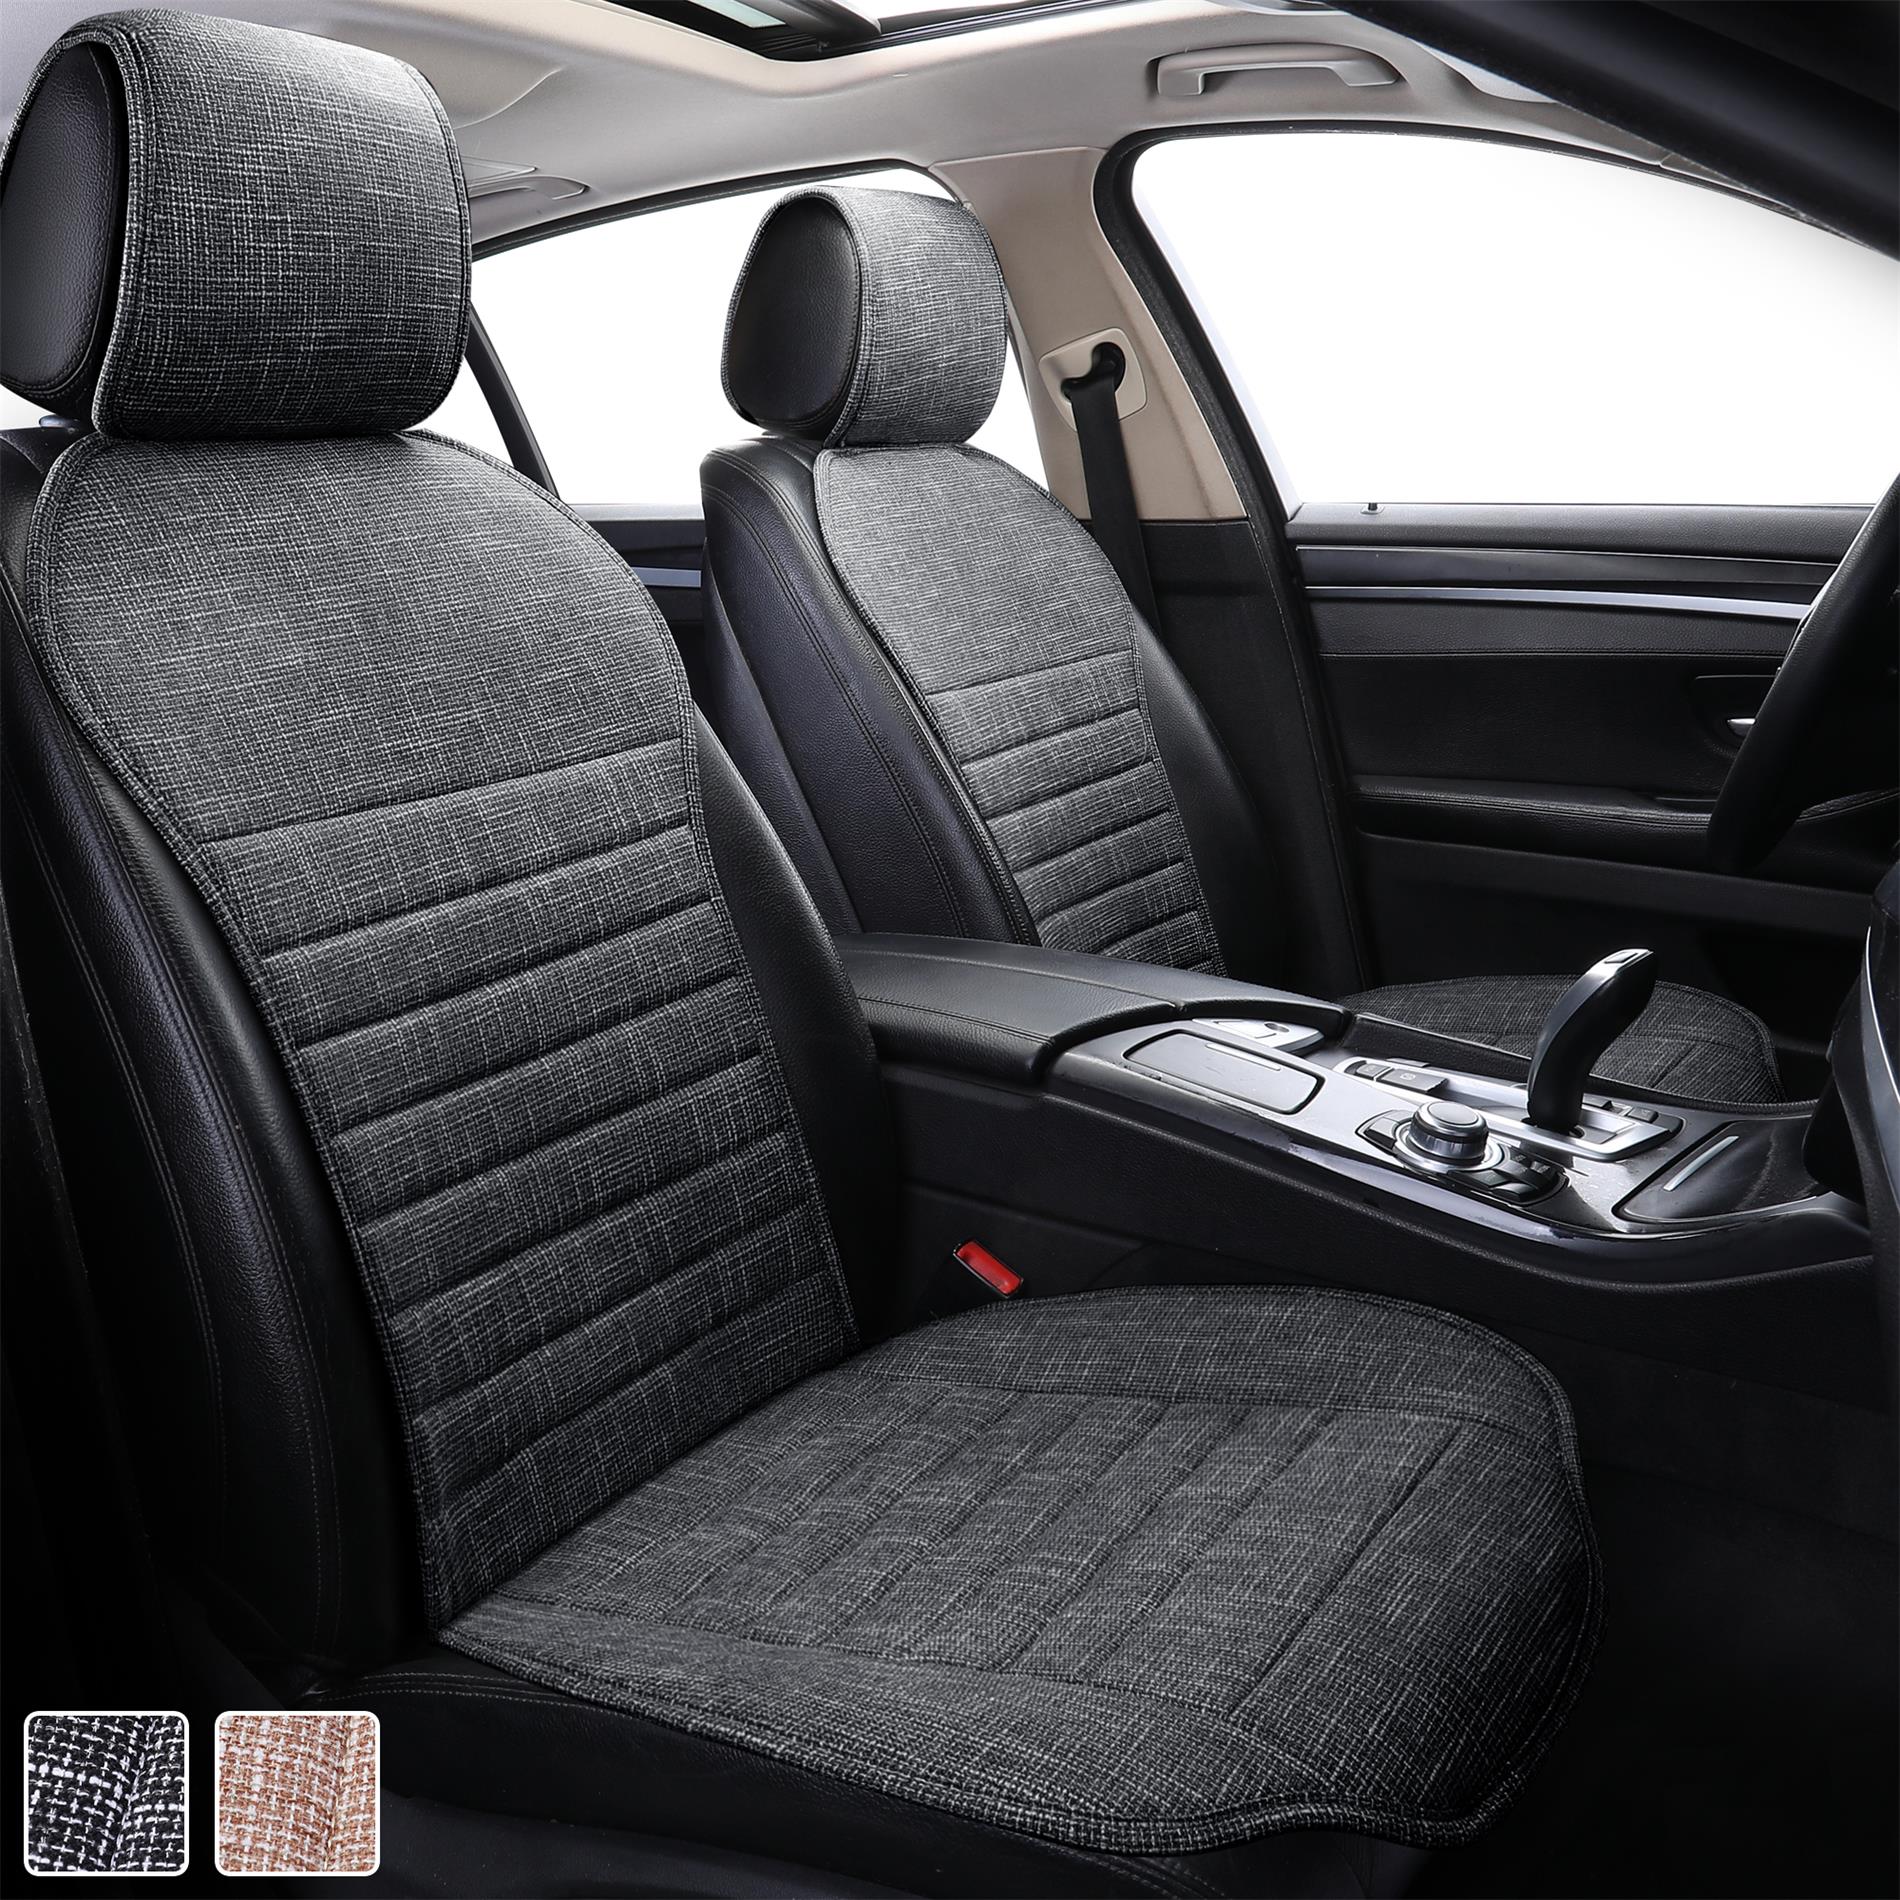 Car Seat Cooling Pad Nonwoven Seat Cushion For Truck Driver